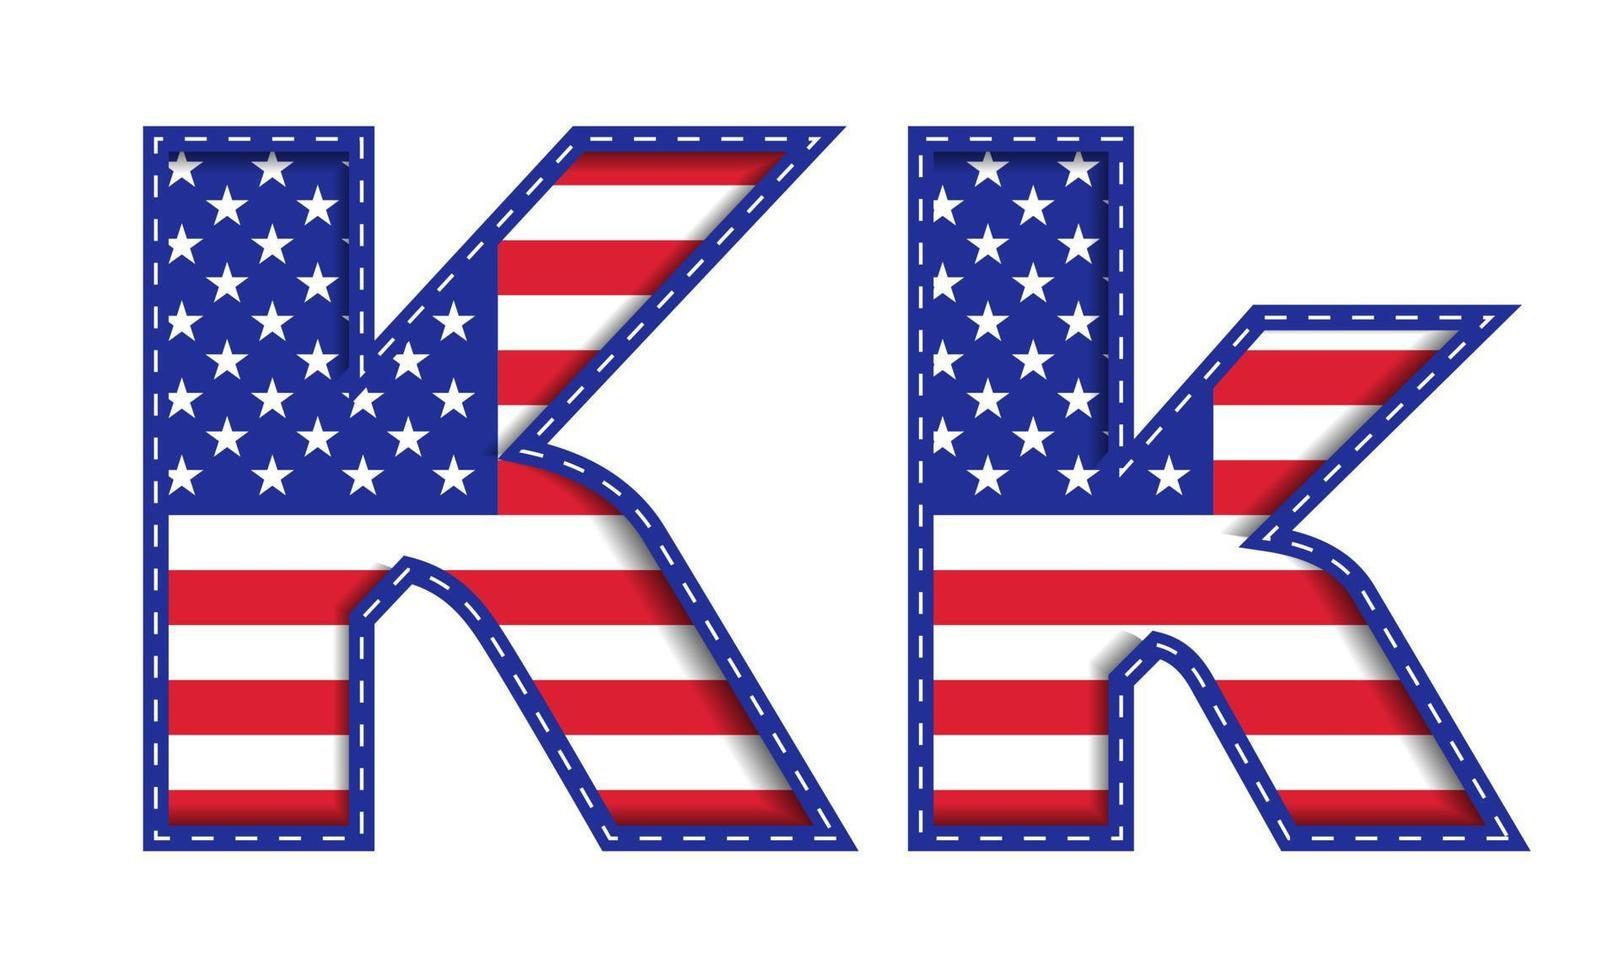 K Alphabet Capital Small Letter USA Independence Memorial Day United States of America Character Font Blue Navy Red Star Stripes  National Flag White Background 3D Paper Cutout  Vector Illustration